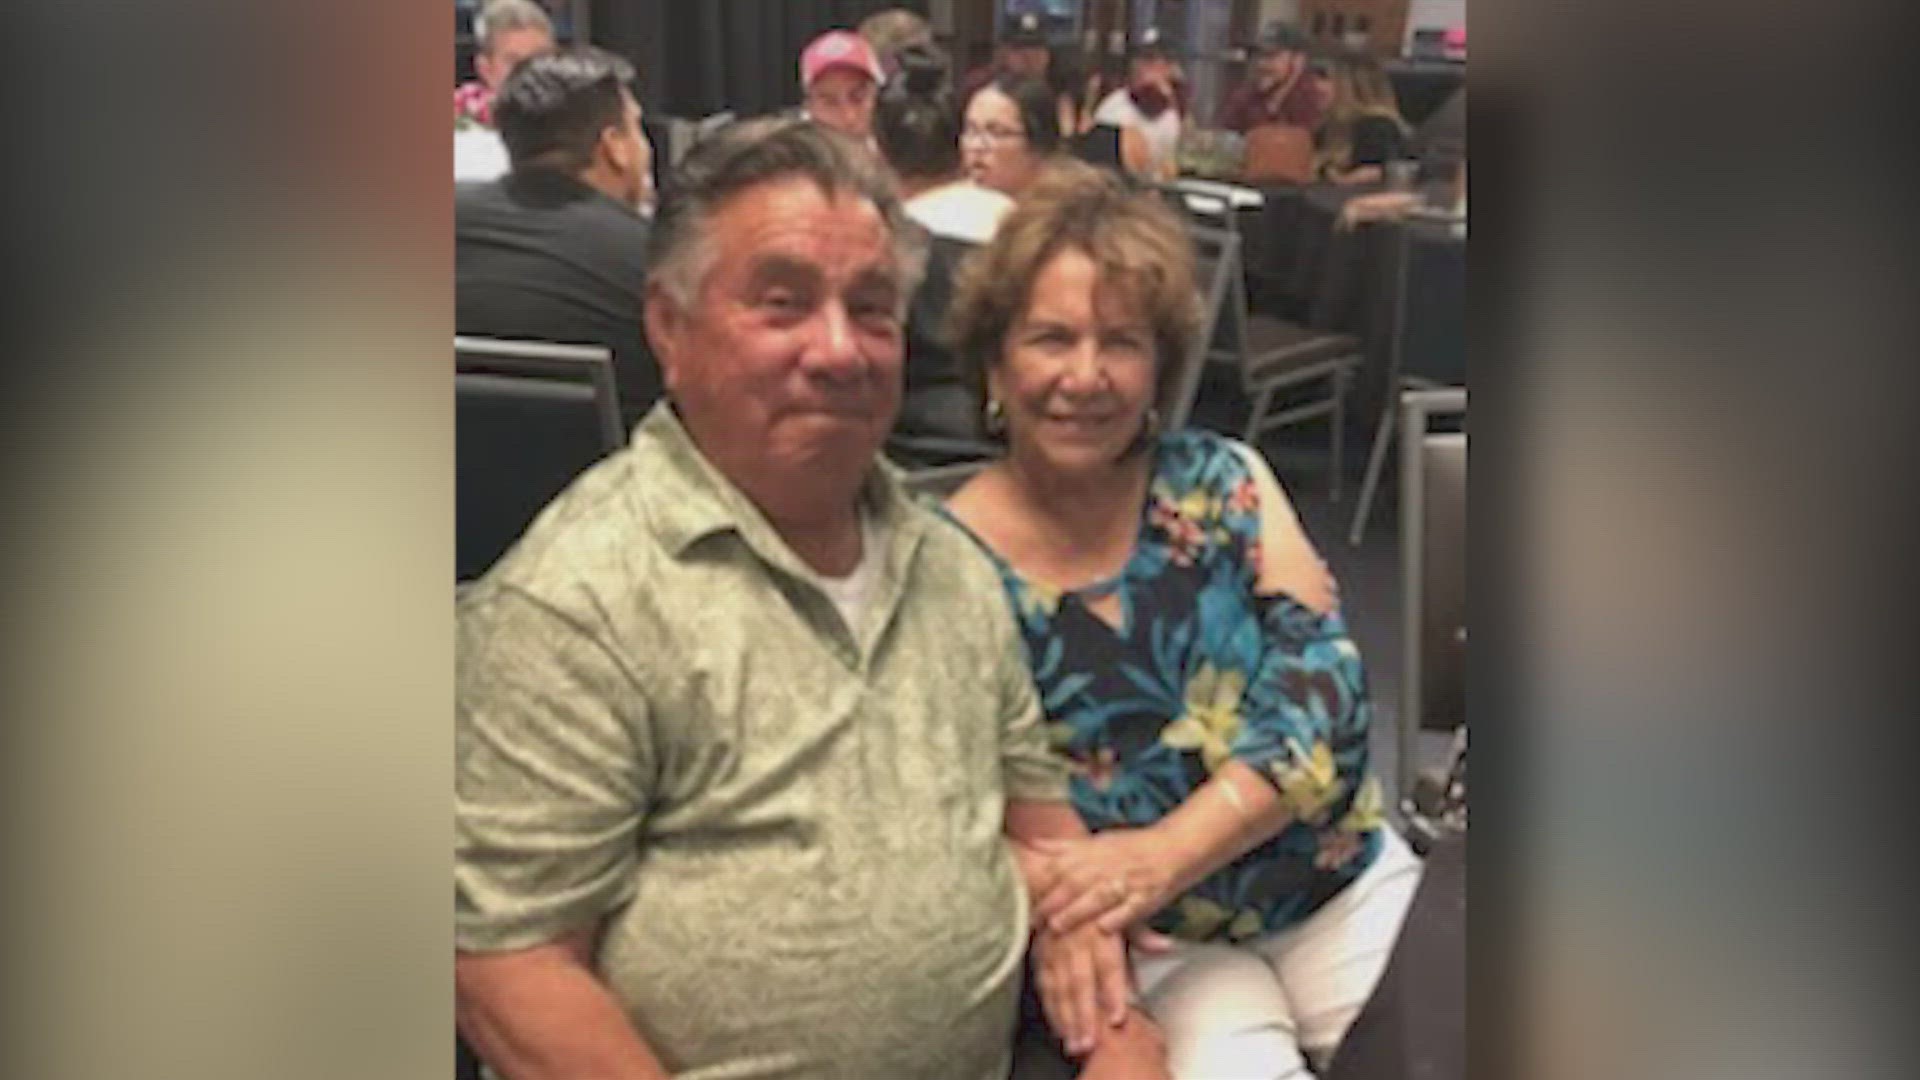 81-year-old Ramon Najera was killed on a dog attack on the west side. Three people were injured, including Najera's wife, Juanita.